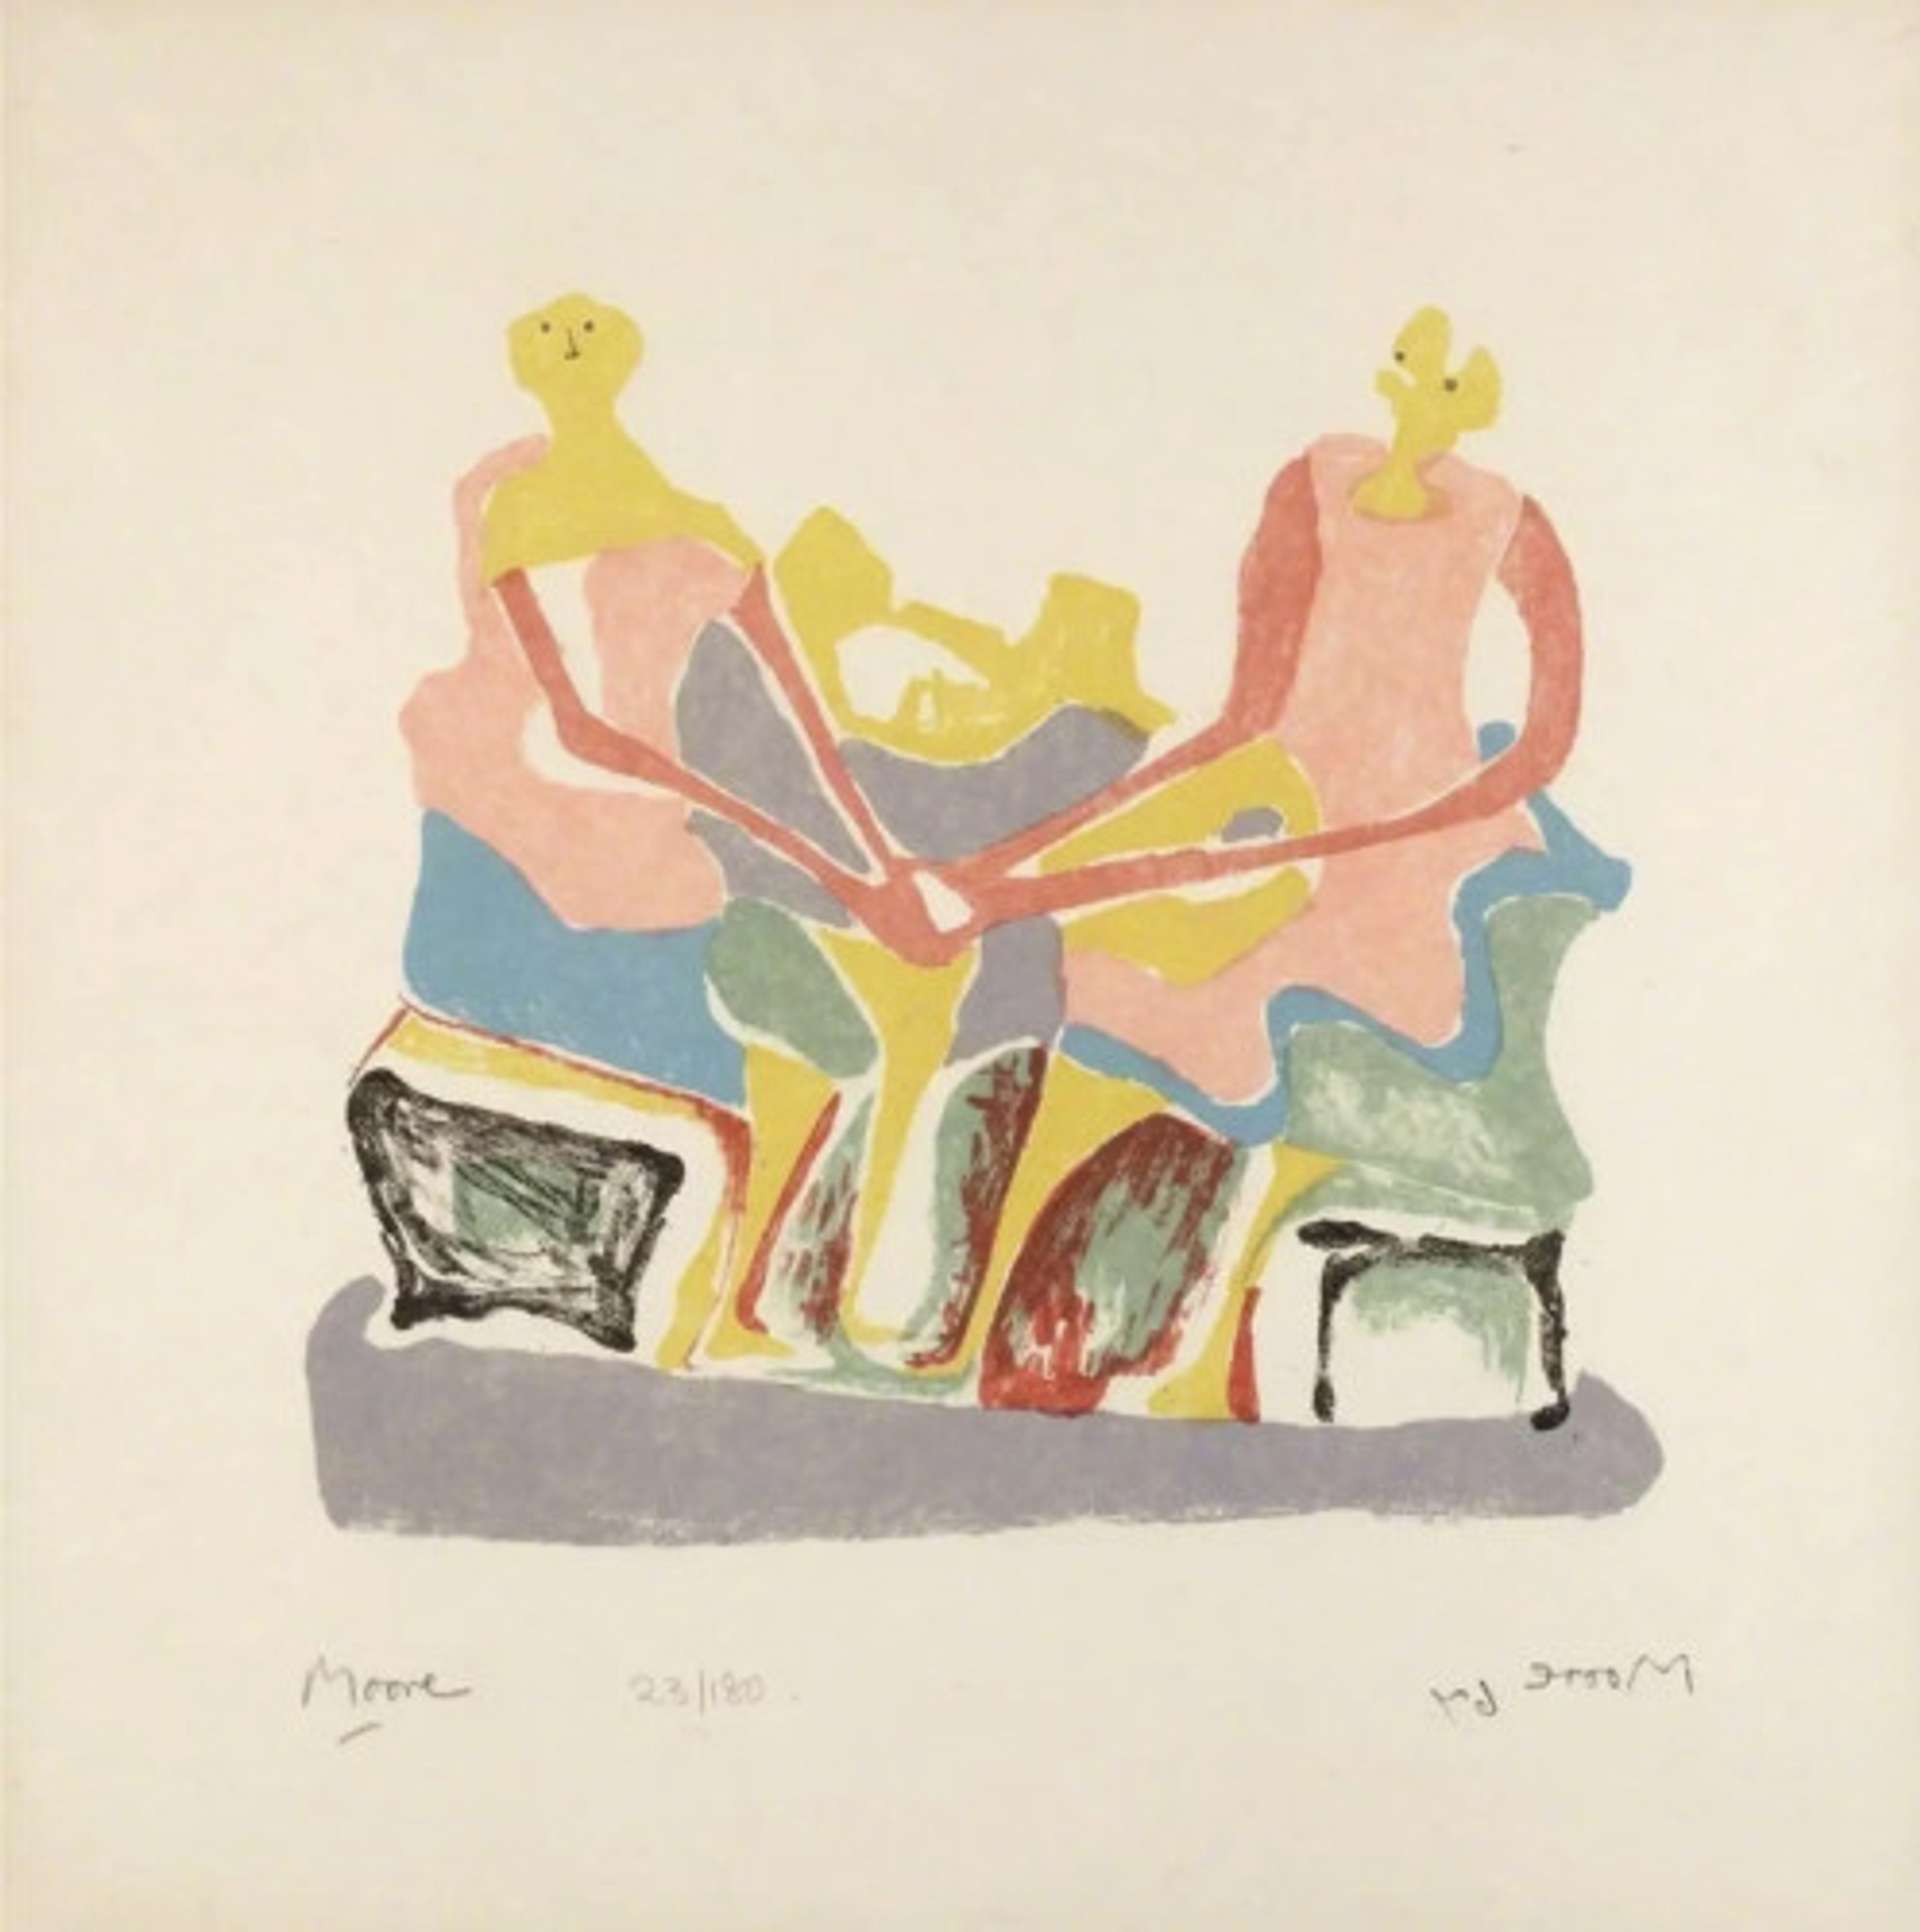 A watercolor painting of two abstracted women in pastel colors seated facing each other, with hints of smaller figures in their laps.